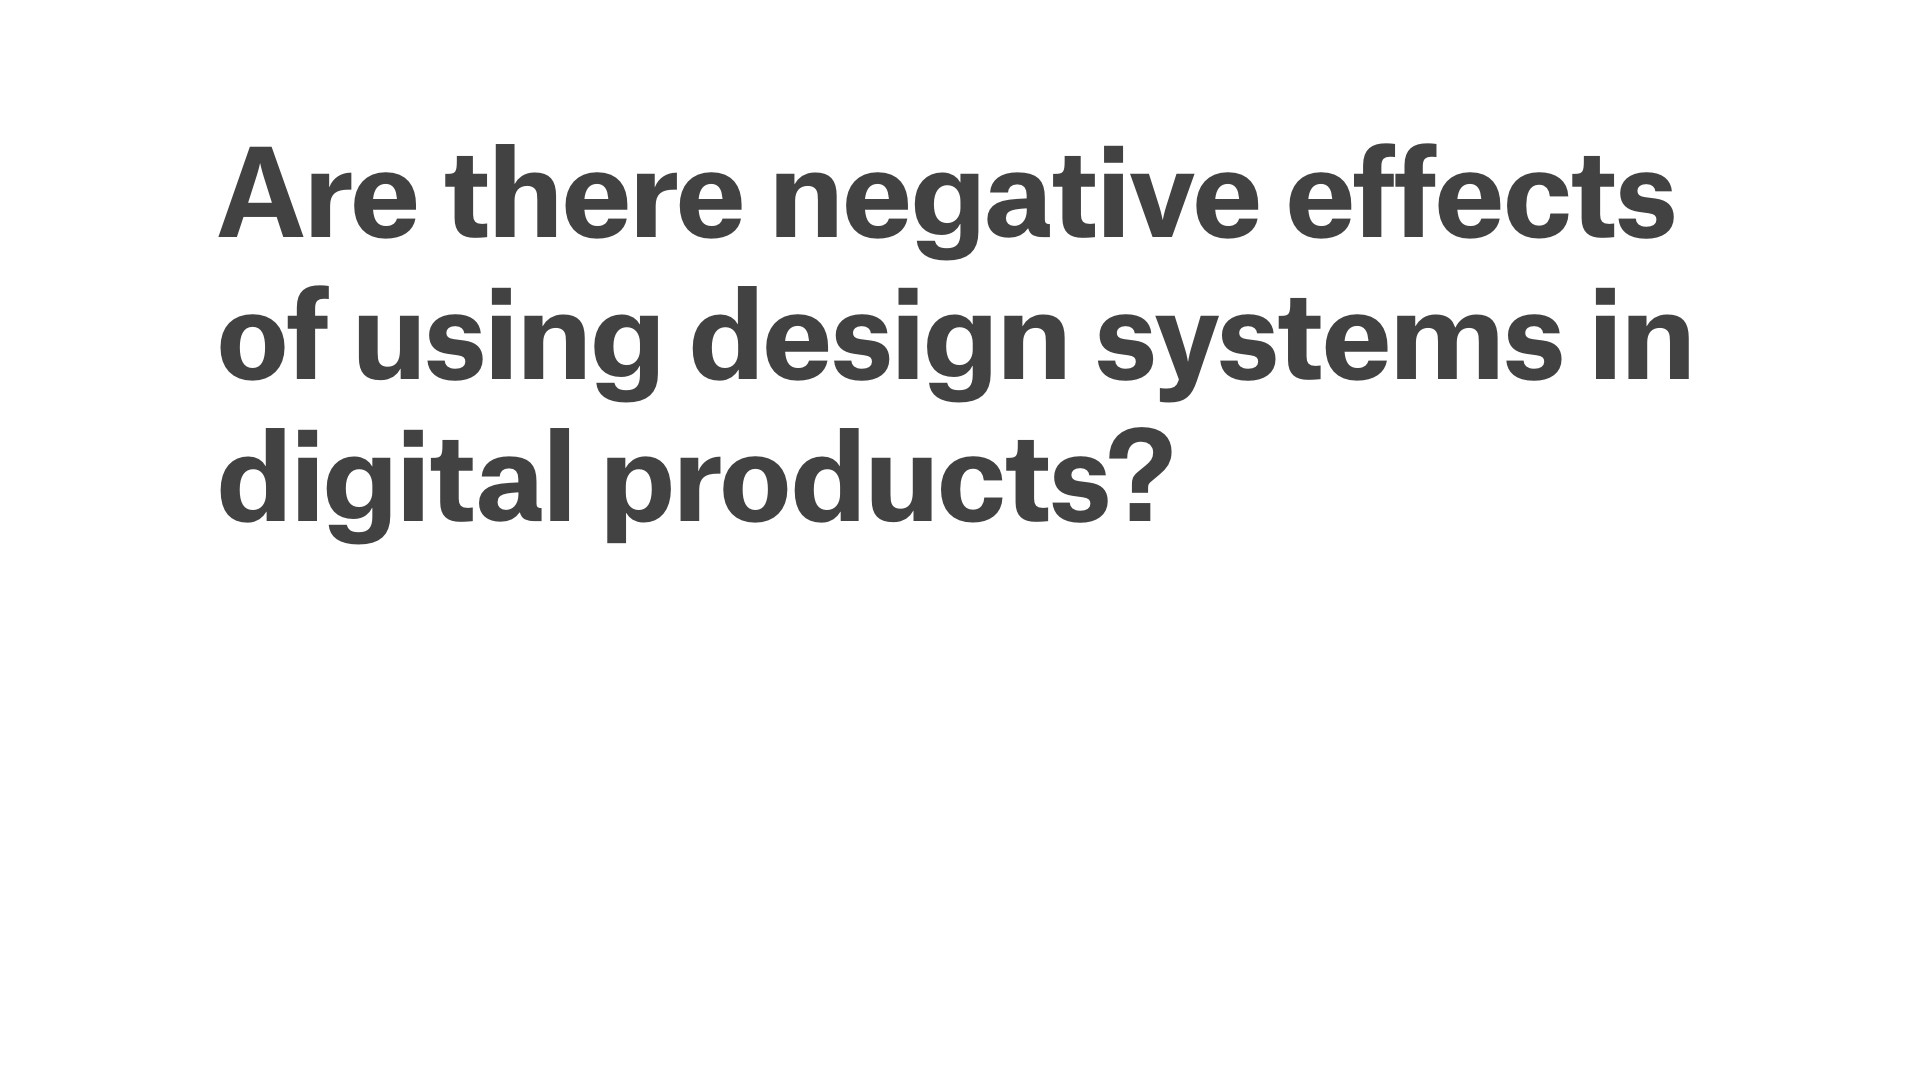 Are there any negative effects of using design systems in digital products?